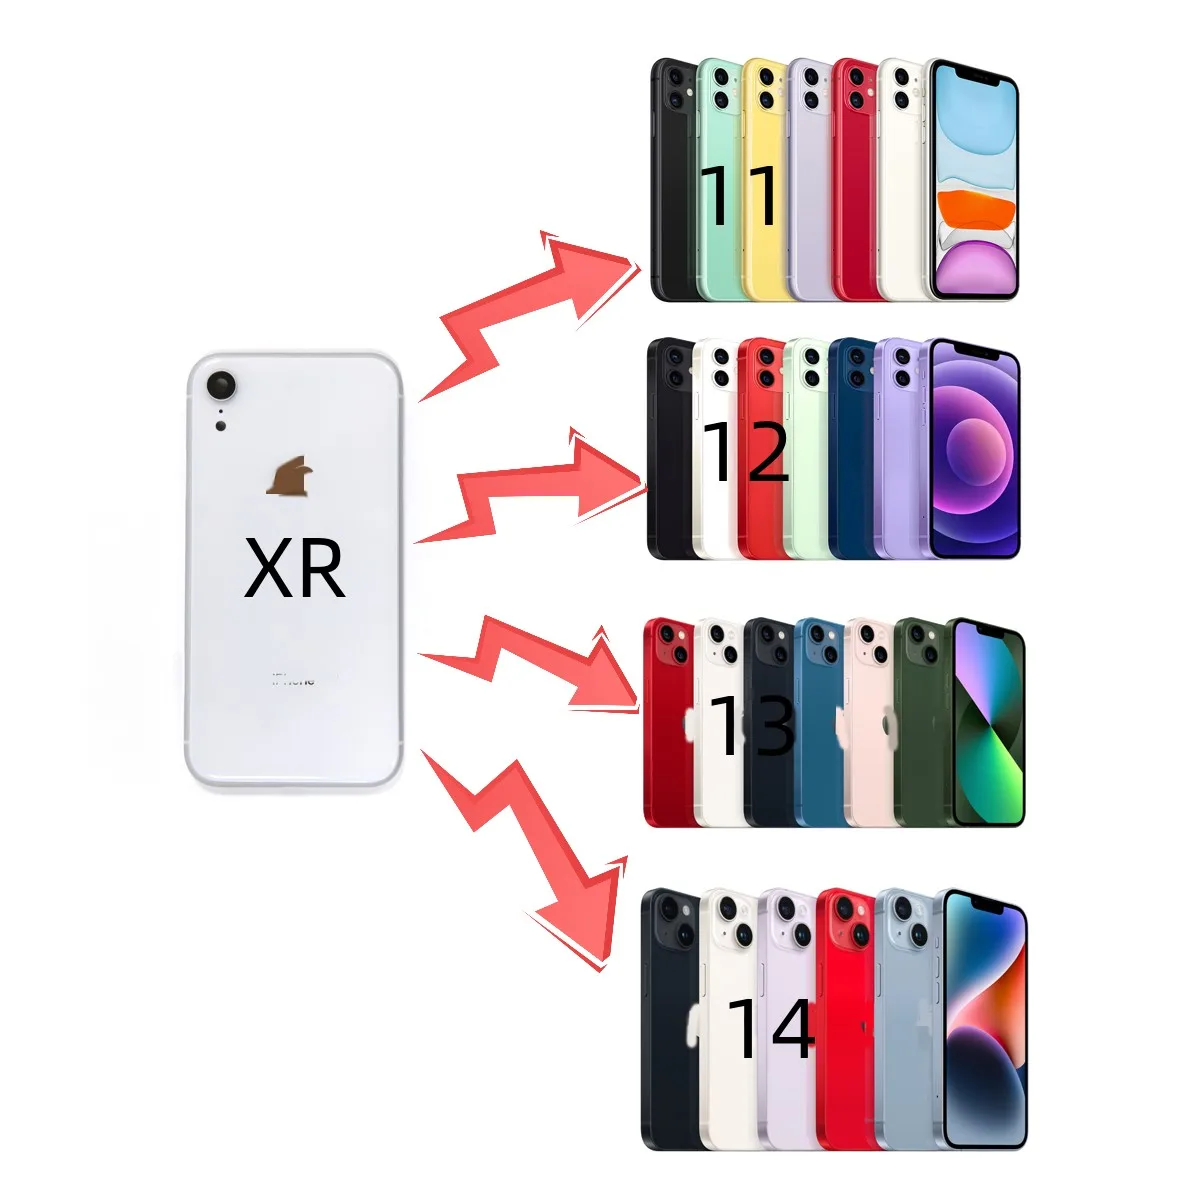 DIY Back Housing for iPhone X XM XS Convert to 14 14 Pro 14 Pro XR 11 to 14 Upgrade XS Max Like 14 Pro Max Back Glass Body